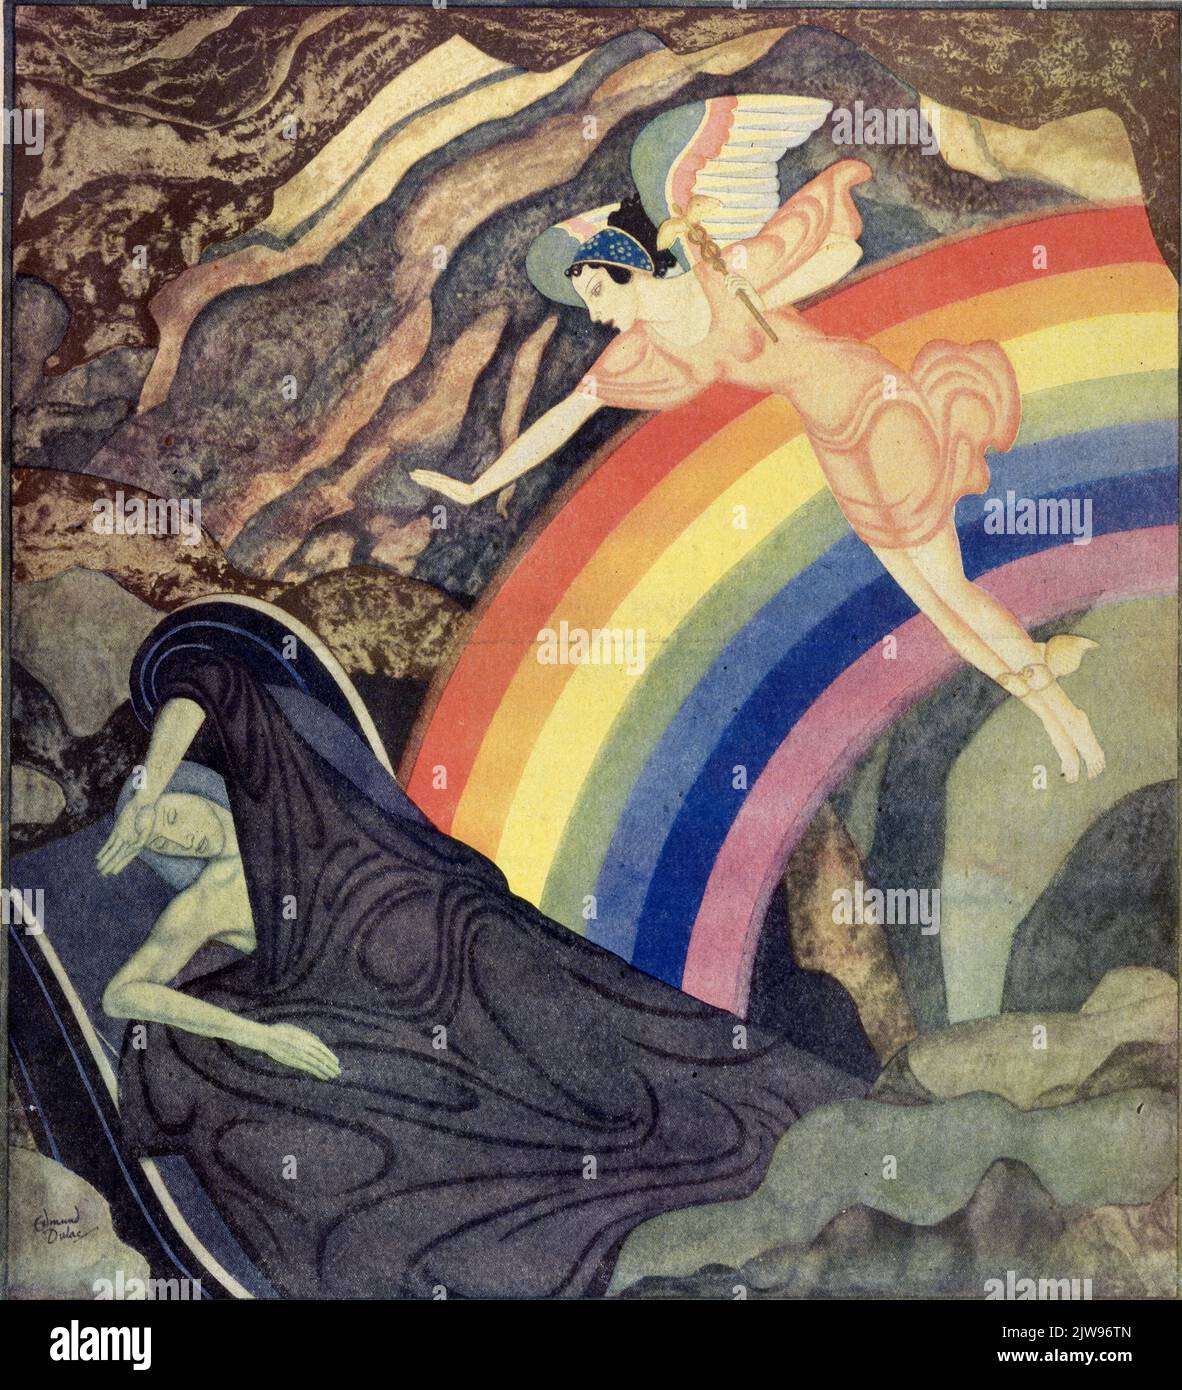 'Iris and The God of Sleep' published April 9,1933 in the American Weekly magazine painted by Edmund Dulac for the series Myths the Ancients Believed. Stock Photo